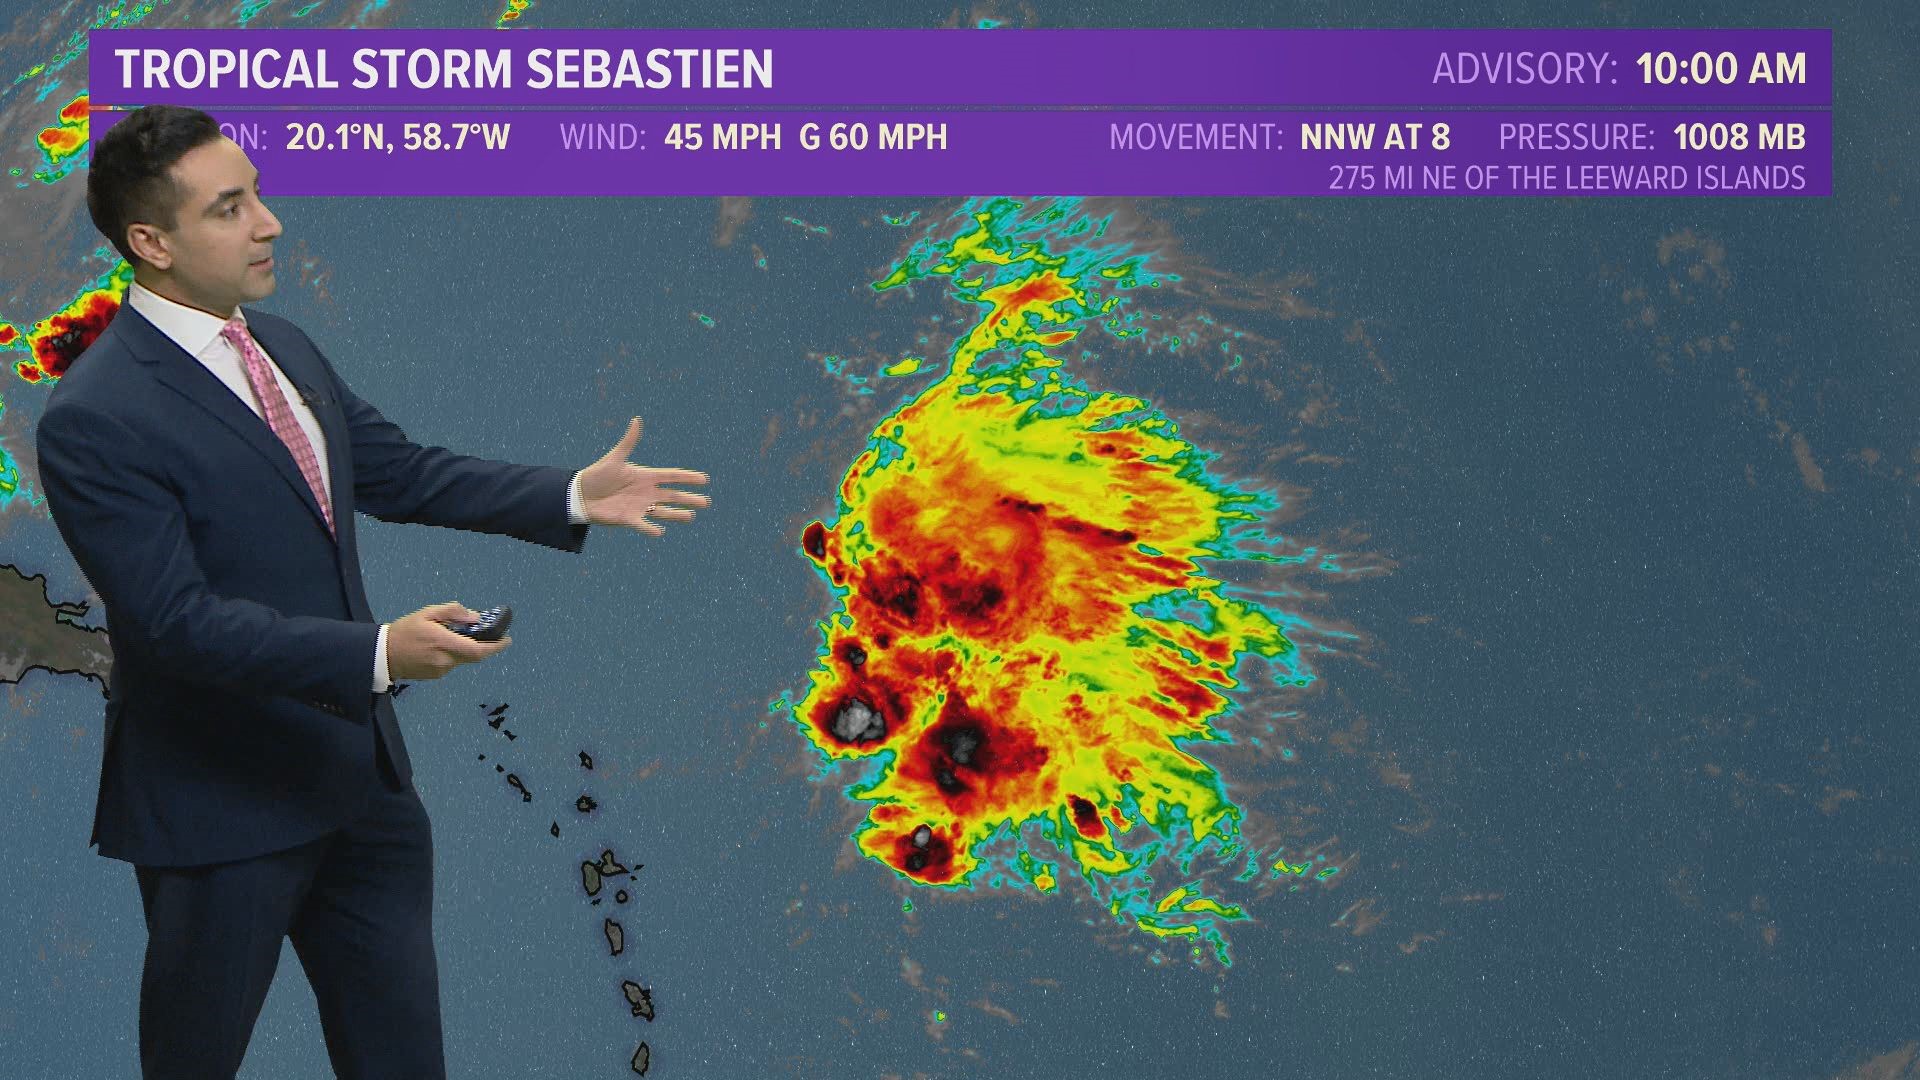 Hurricane season isn't over yet, and 13News Now meteorologist Tim Pandajis is covering the newly-formed Tropical Storm Sebastien.